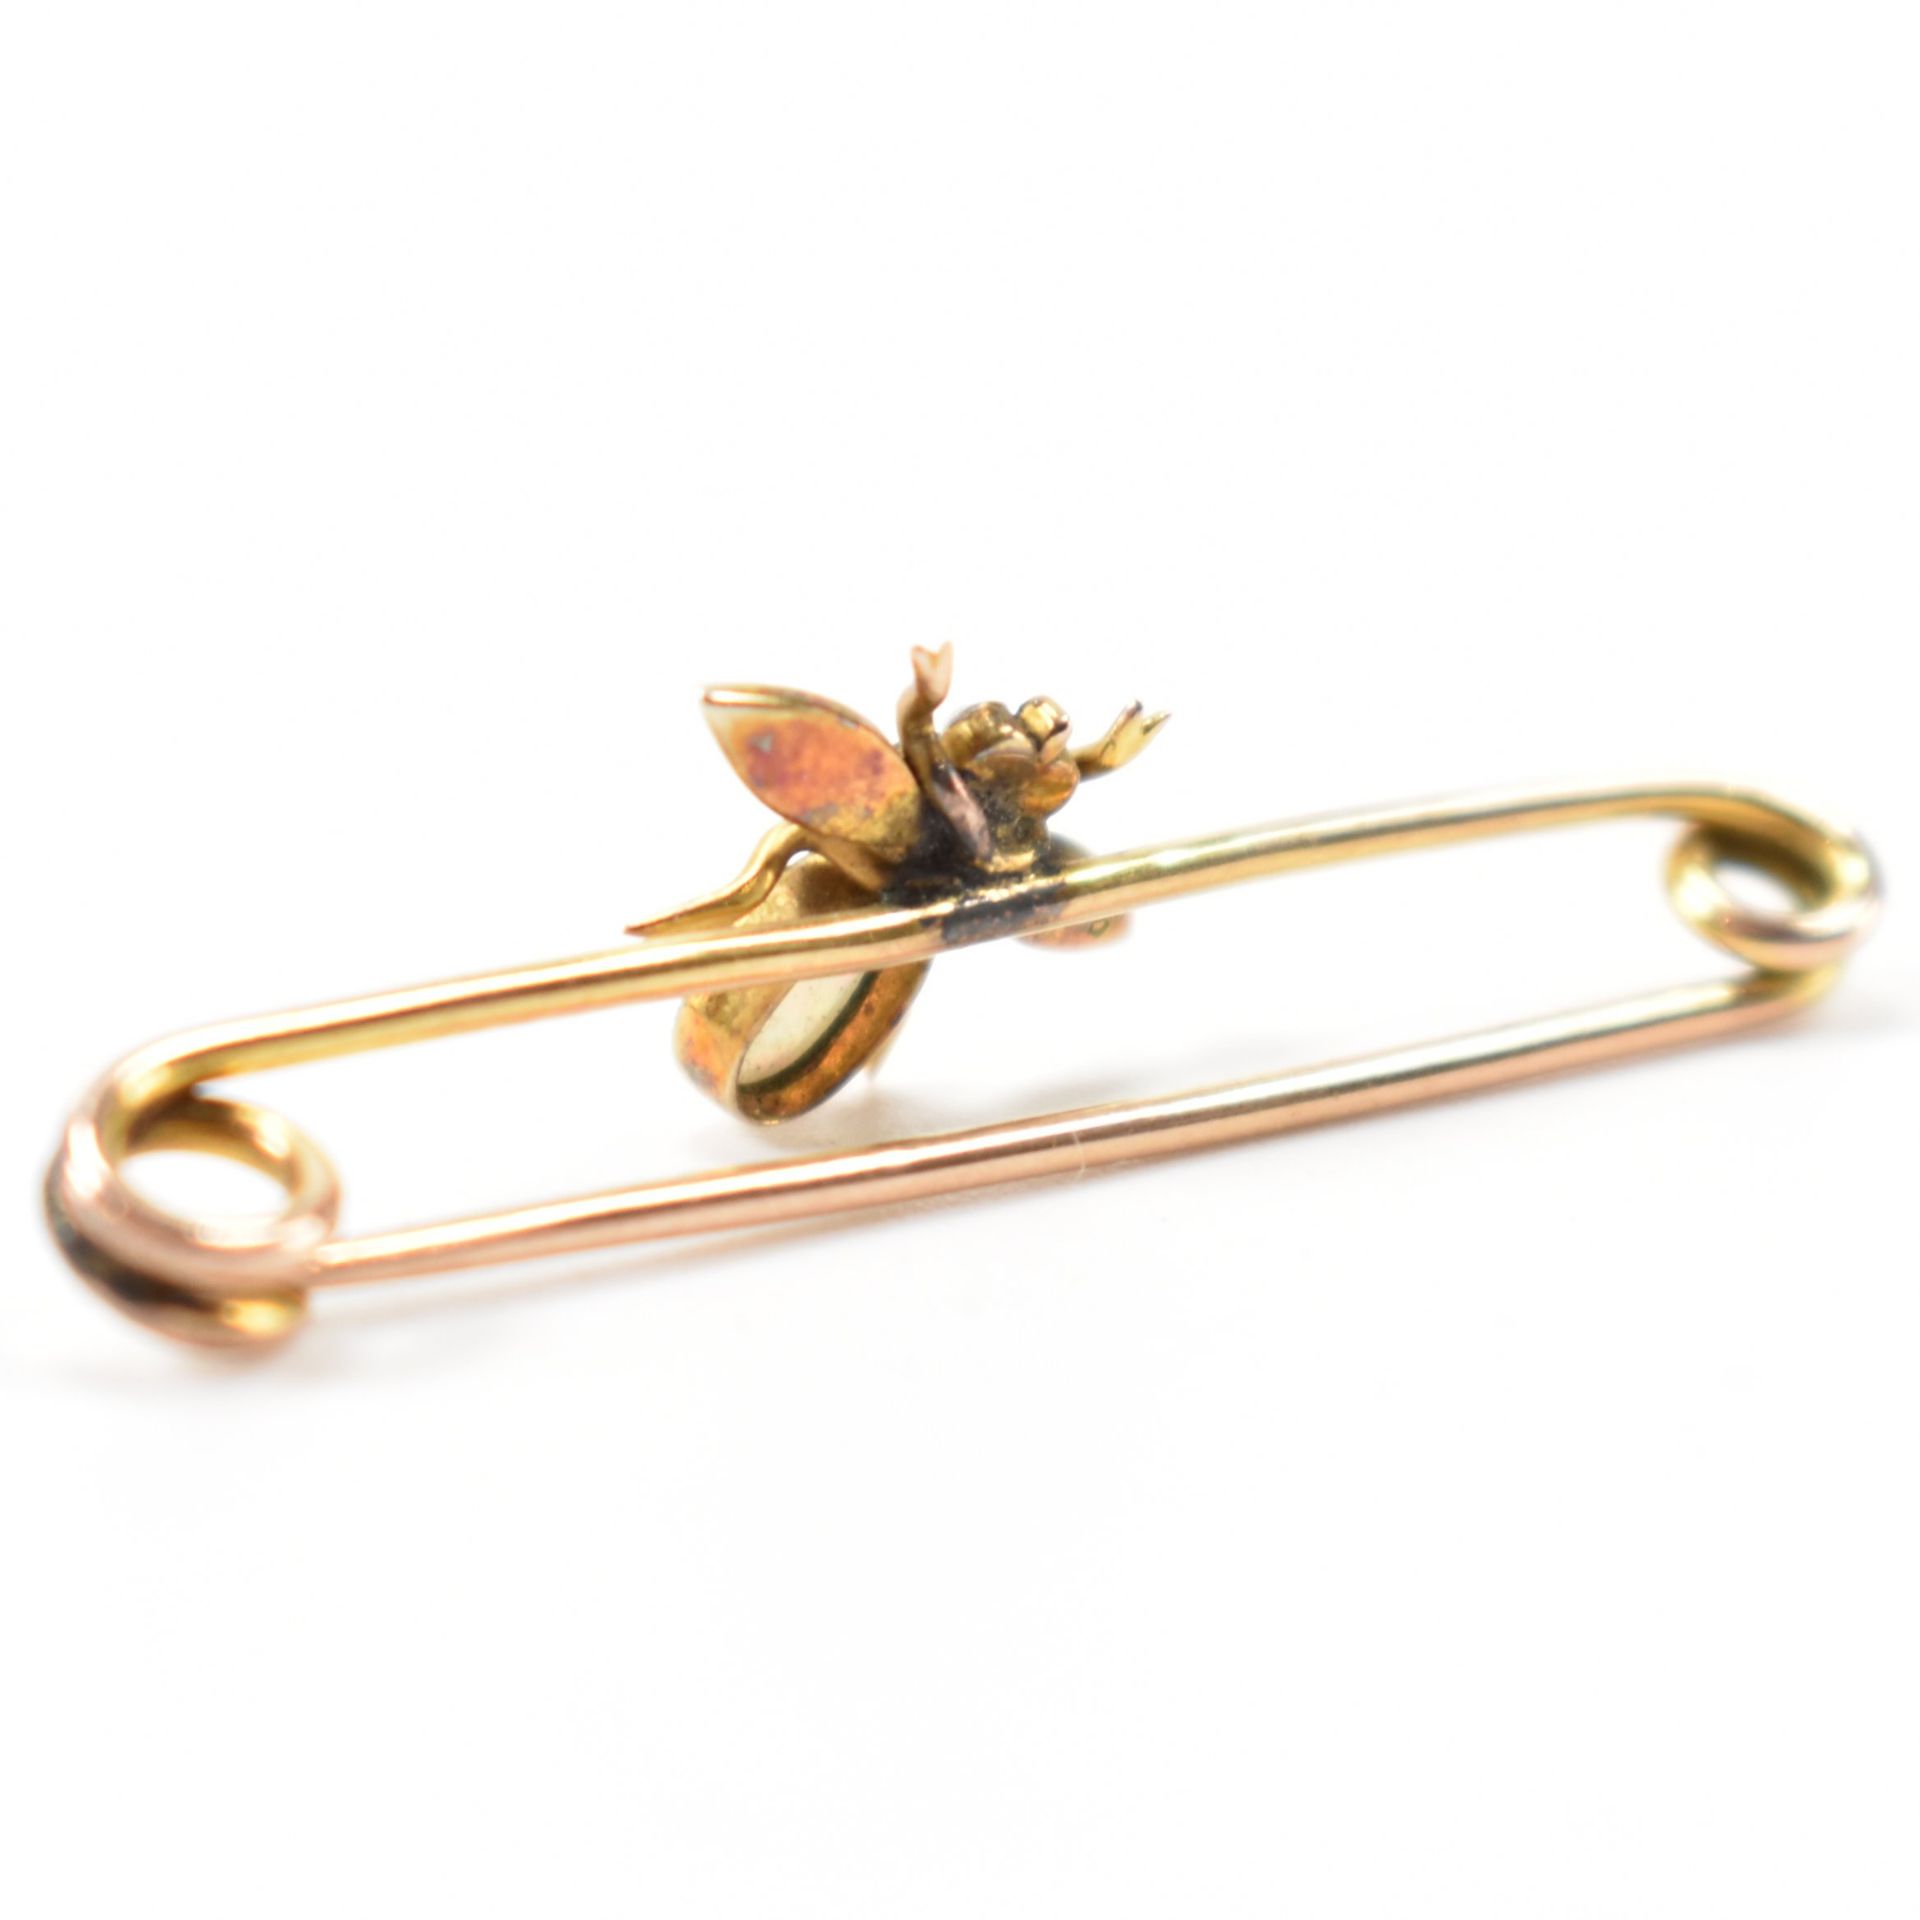 VICTORIAN 9CT GOLD OPAL & SEED PEARL BUG BROOCH - Image 3 of 9